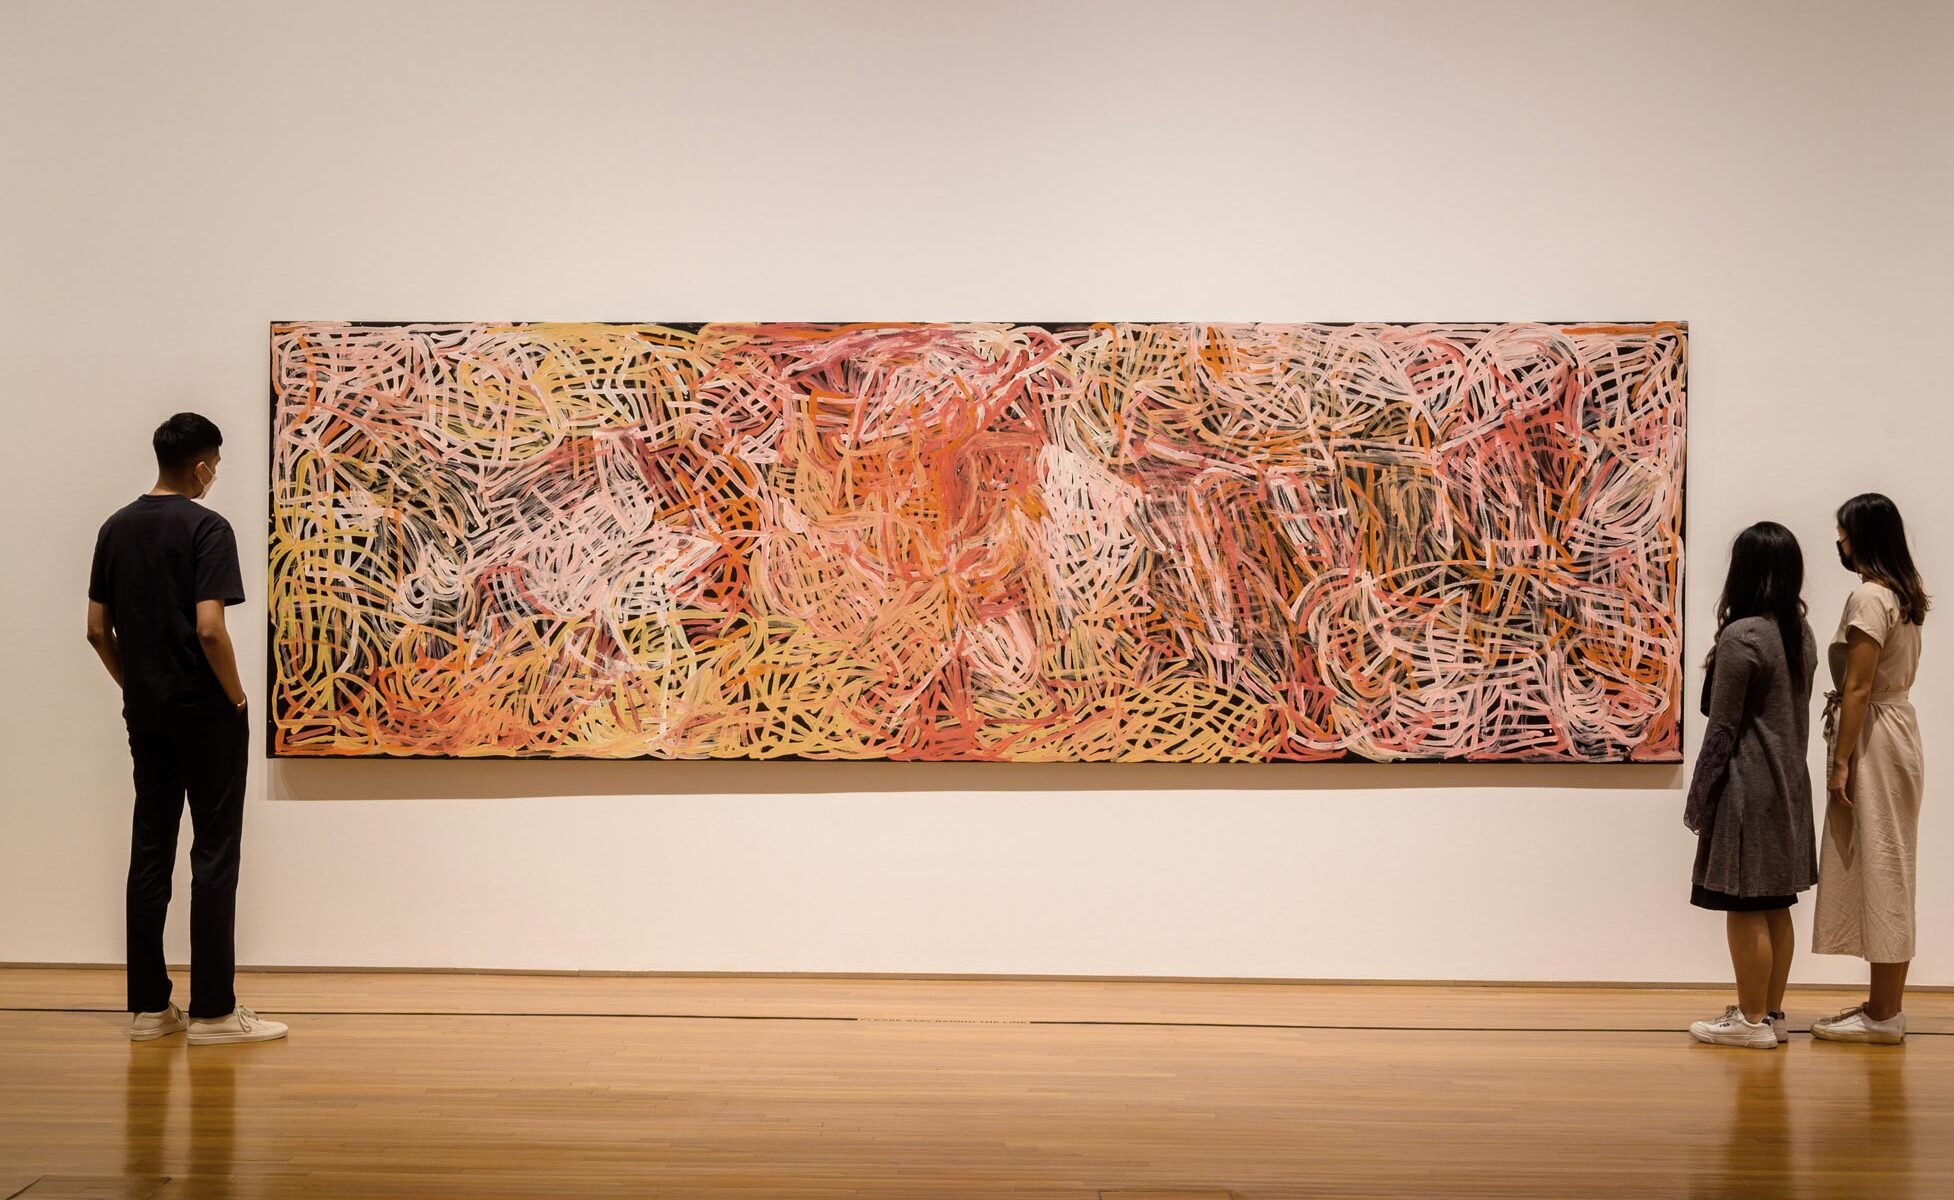 Emily Kam Kngwarray, Anmatyerr people, Yam awely, 1995, installation view, Ever Present_ First Peoples Art of Australia, National Gallery, Singapore, 2022, courtesy National Gallery, Singapore